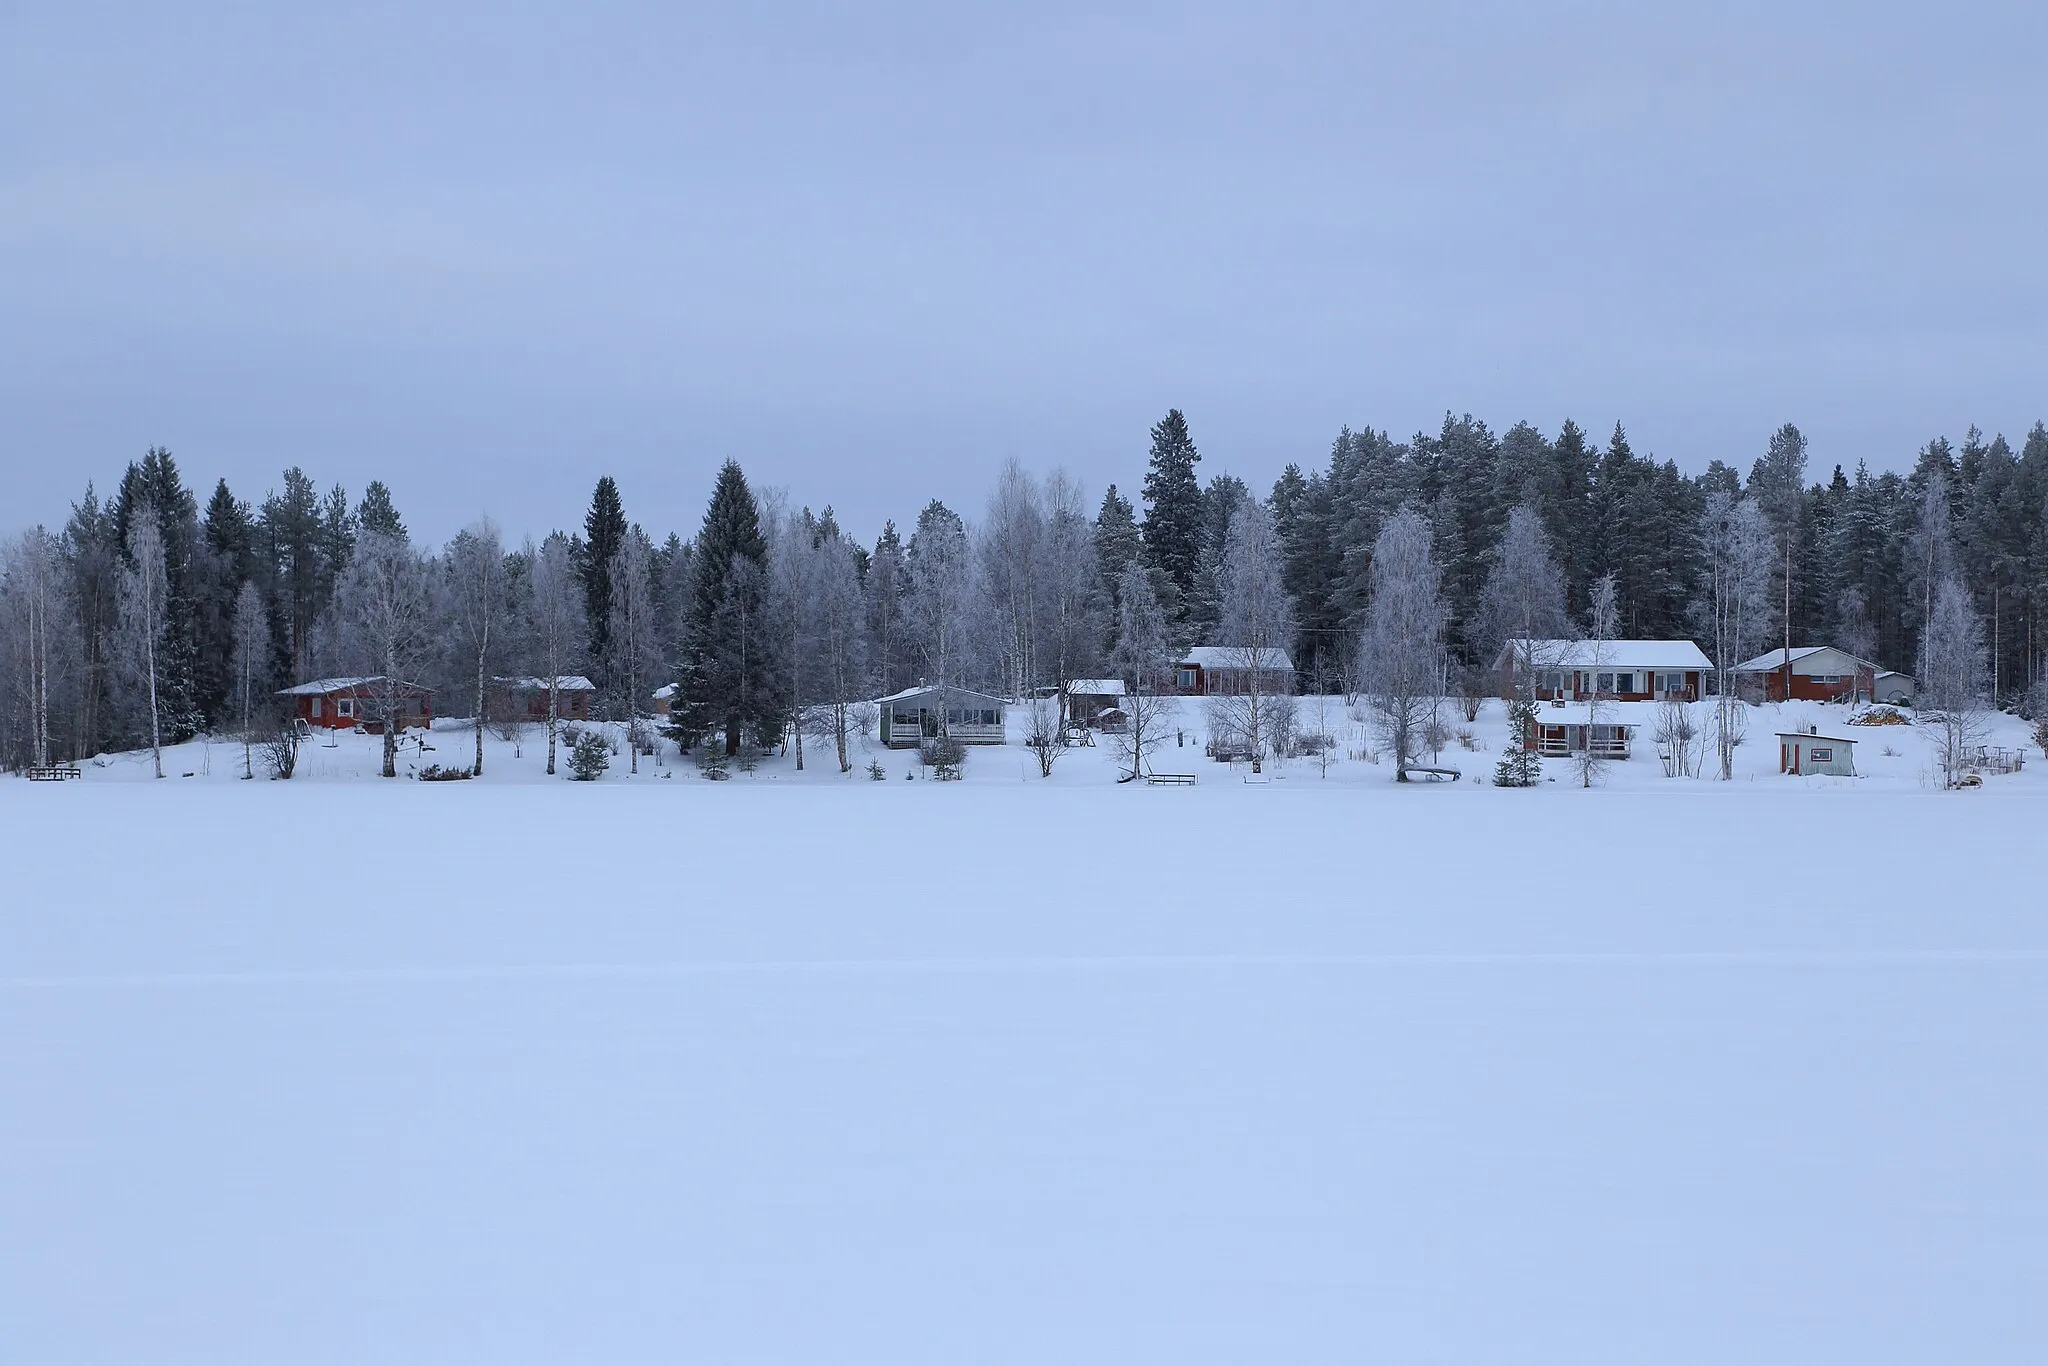 Photo showing: The frozen Loukkojärvi lake in the Hannus district of Oulu, Finland.